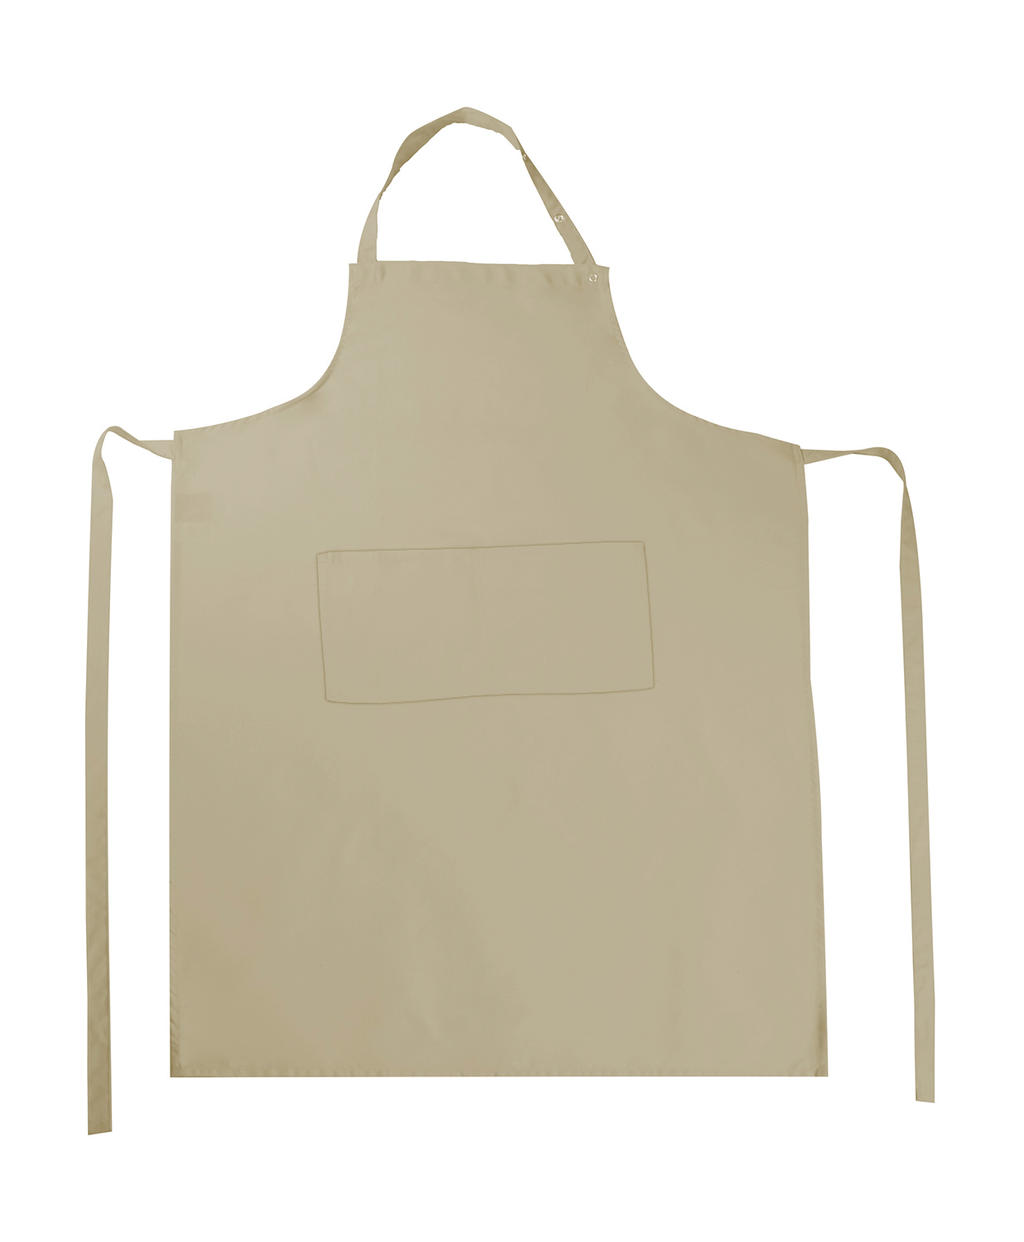  Amsterdam Bib Apron with Pocket in Farbe Natural